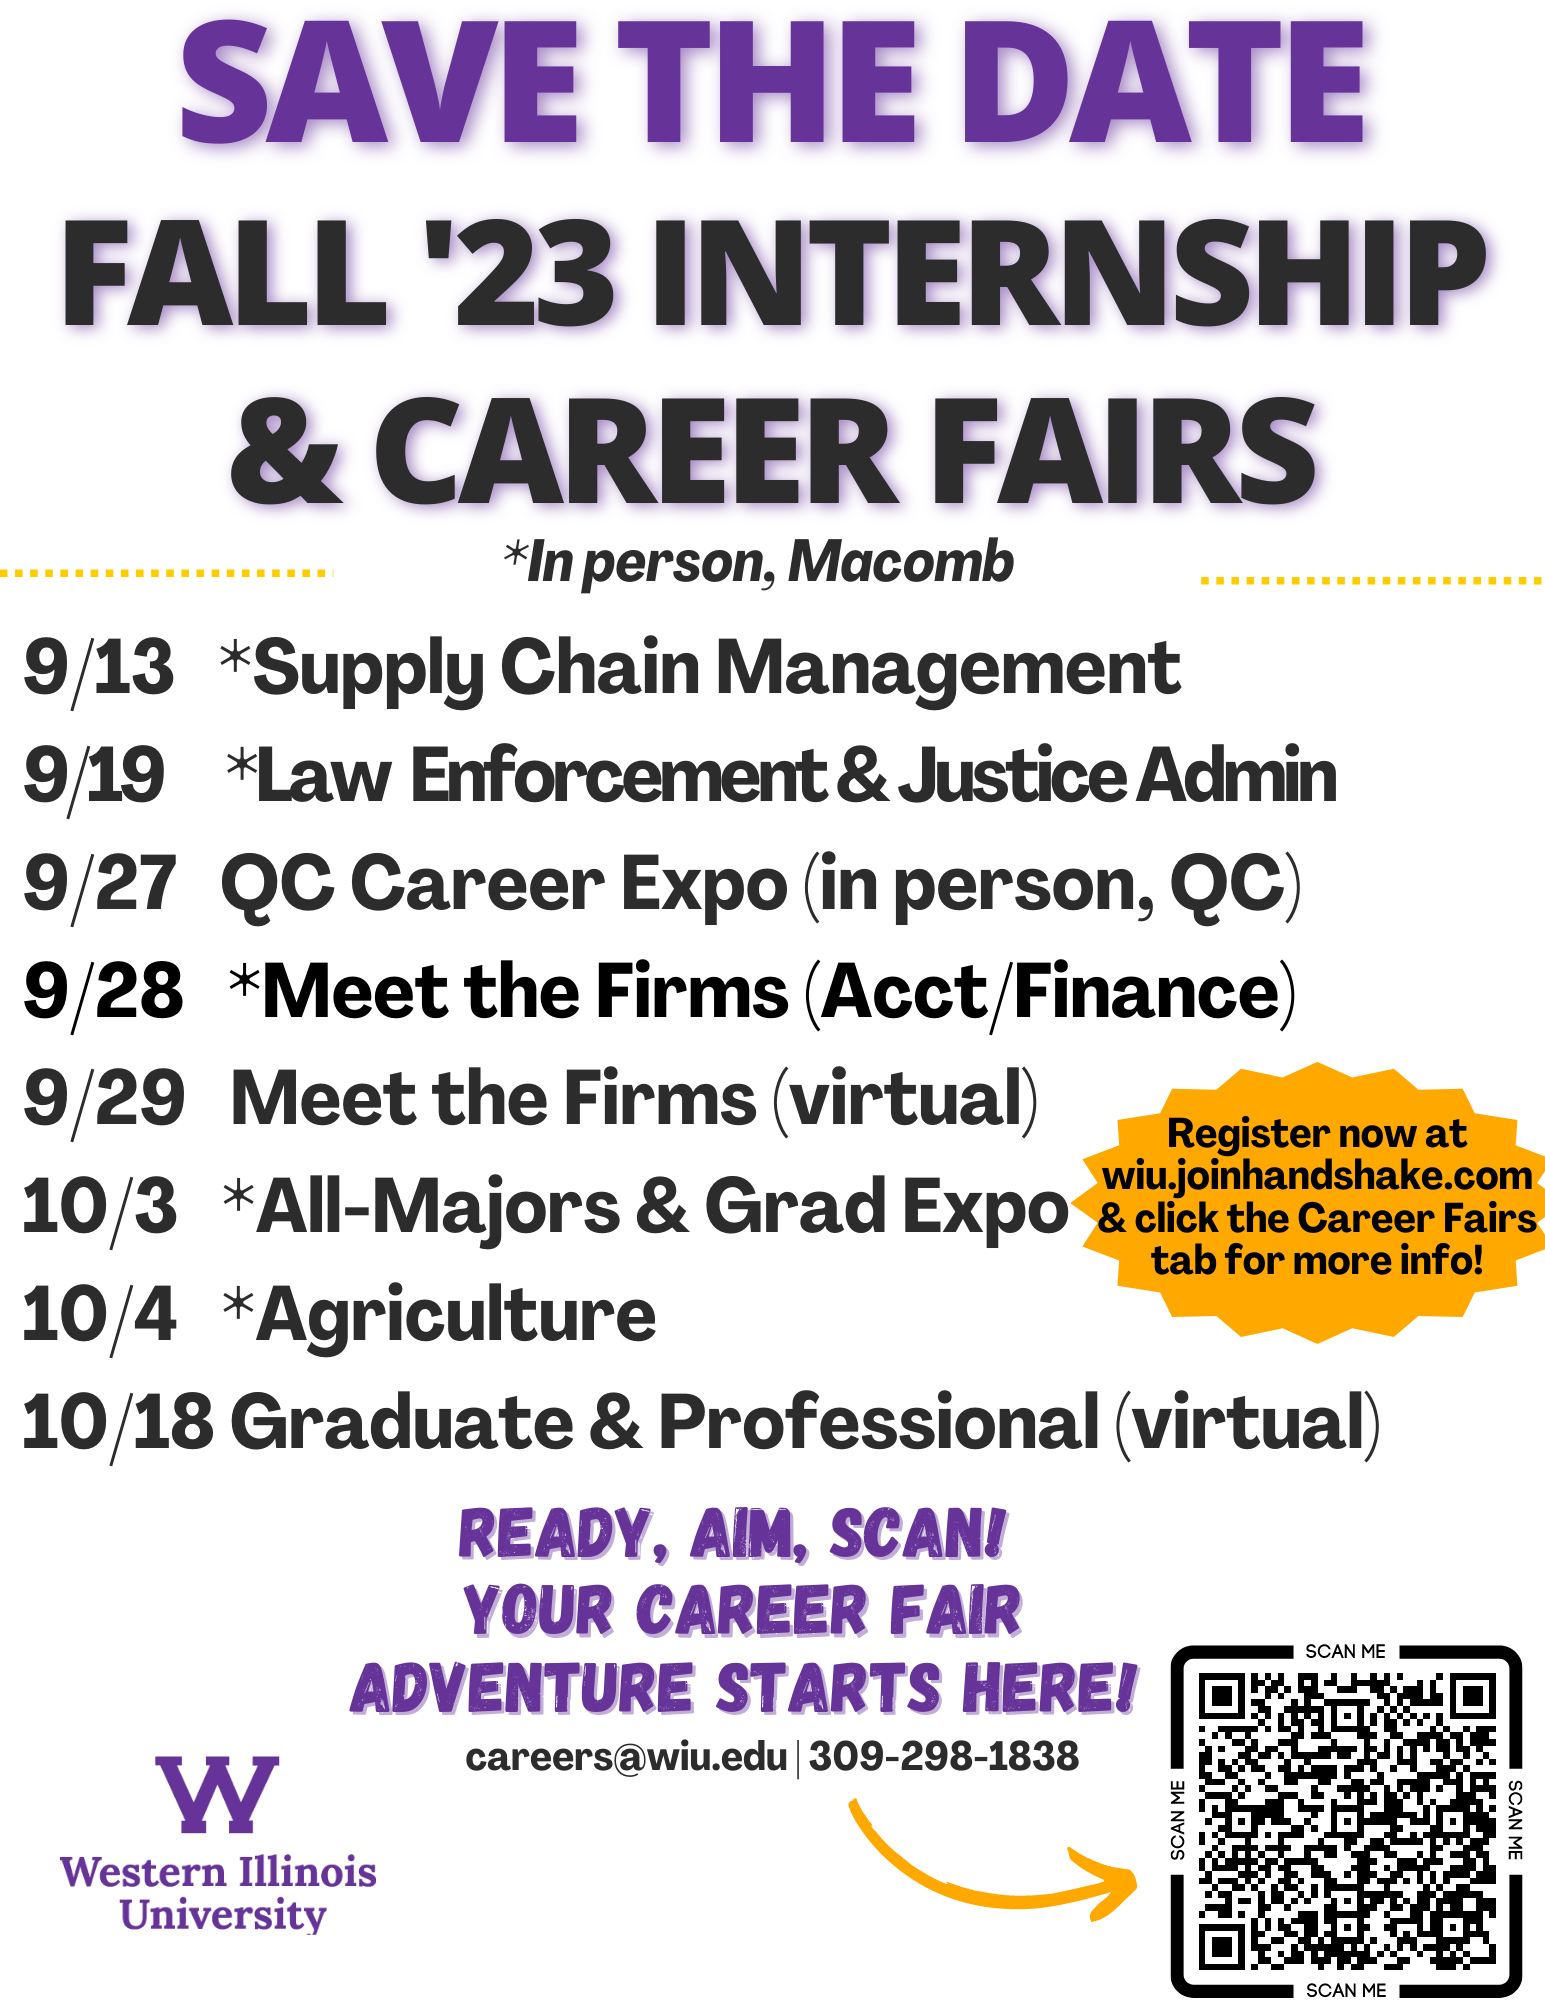 List of Career fairs for fall 23 and instructions to head to Handshake for more info and to register